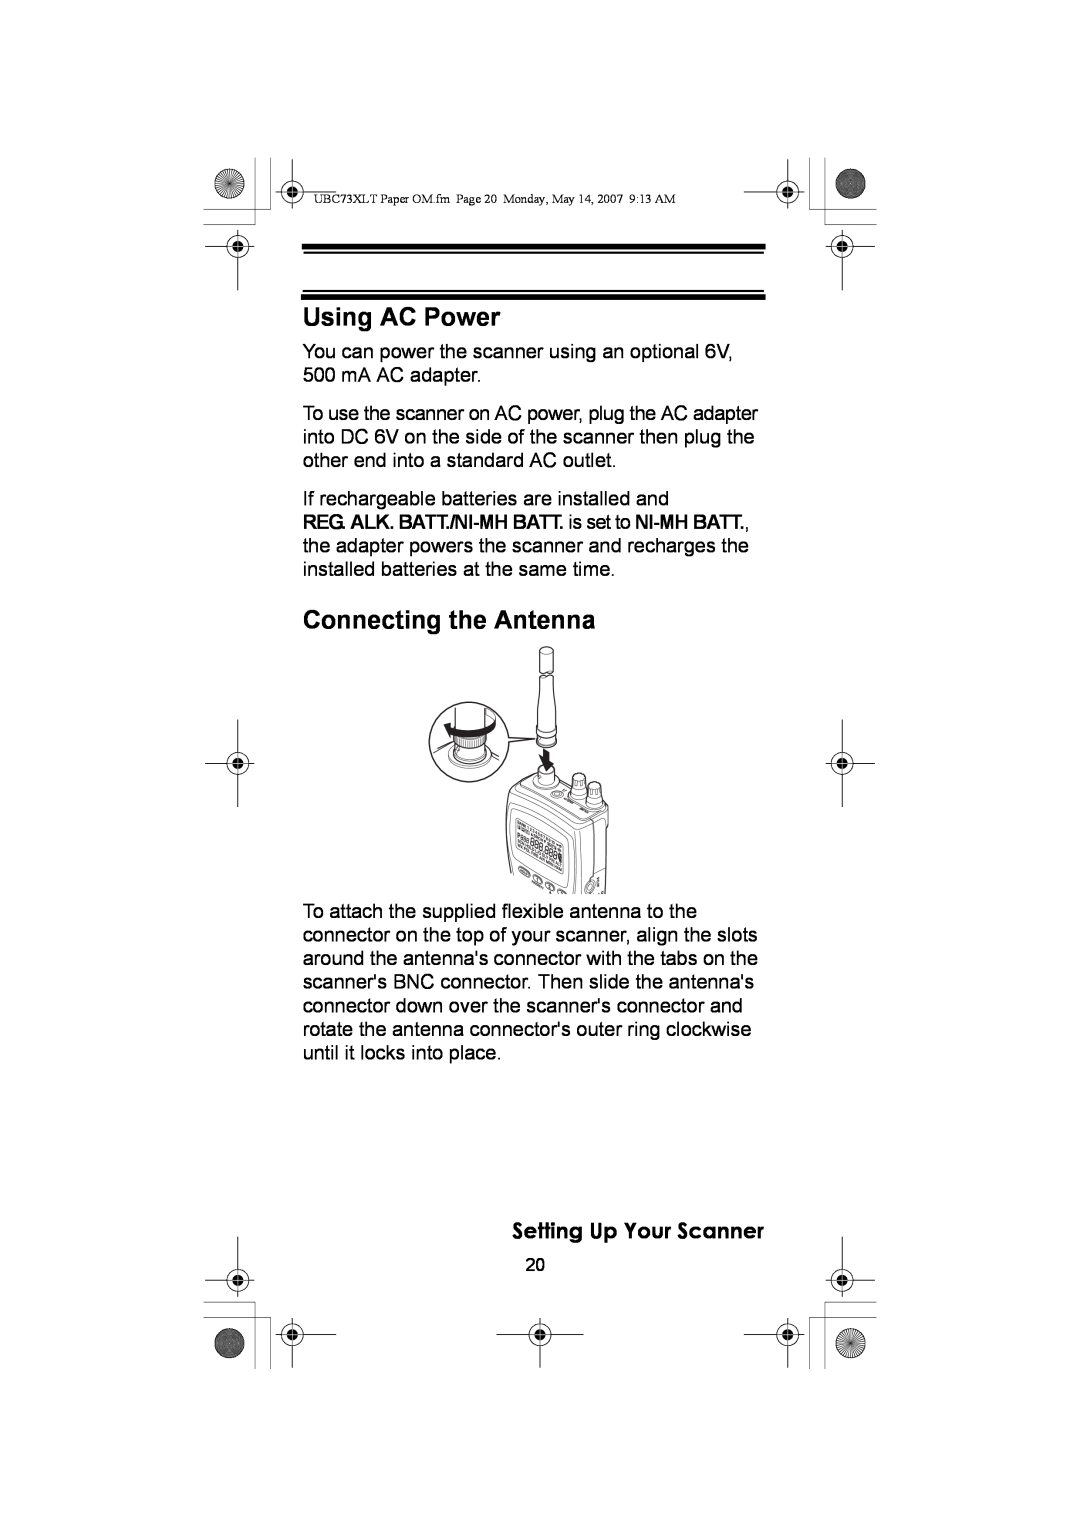 Uniden UBC73XLT owner manual Using AC Power, Connecting the Antenna, Setting Up Your Scanner 